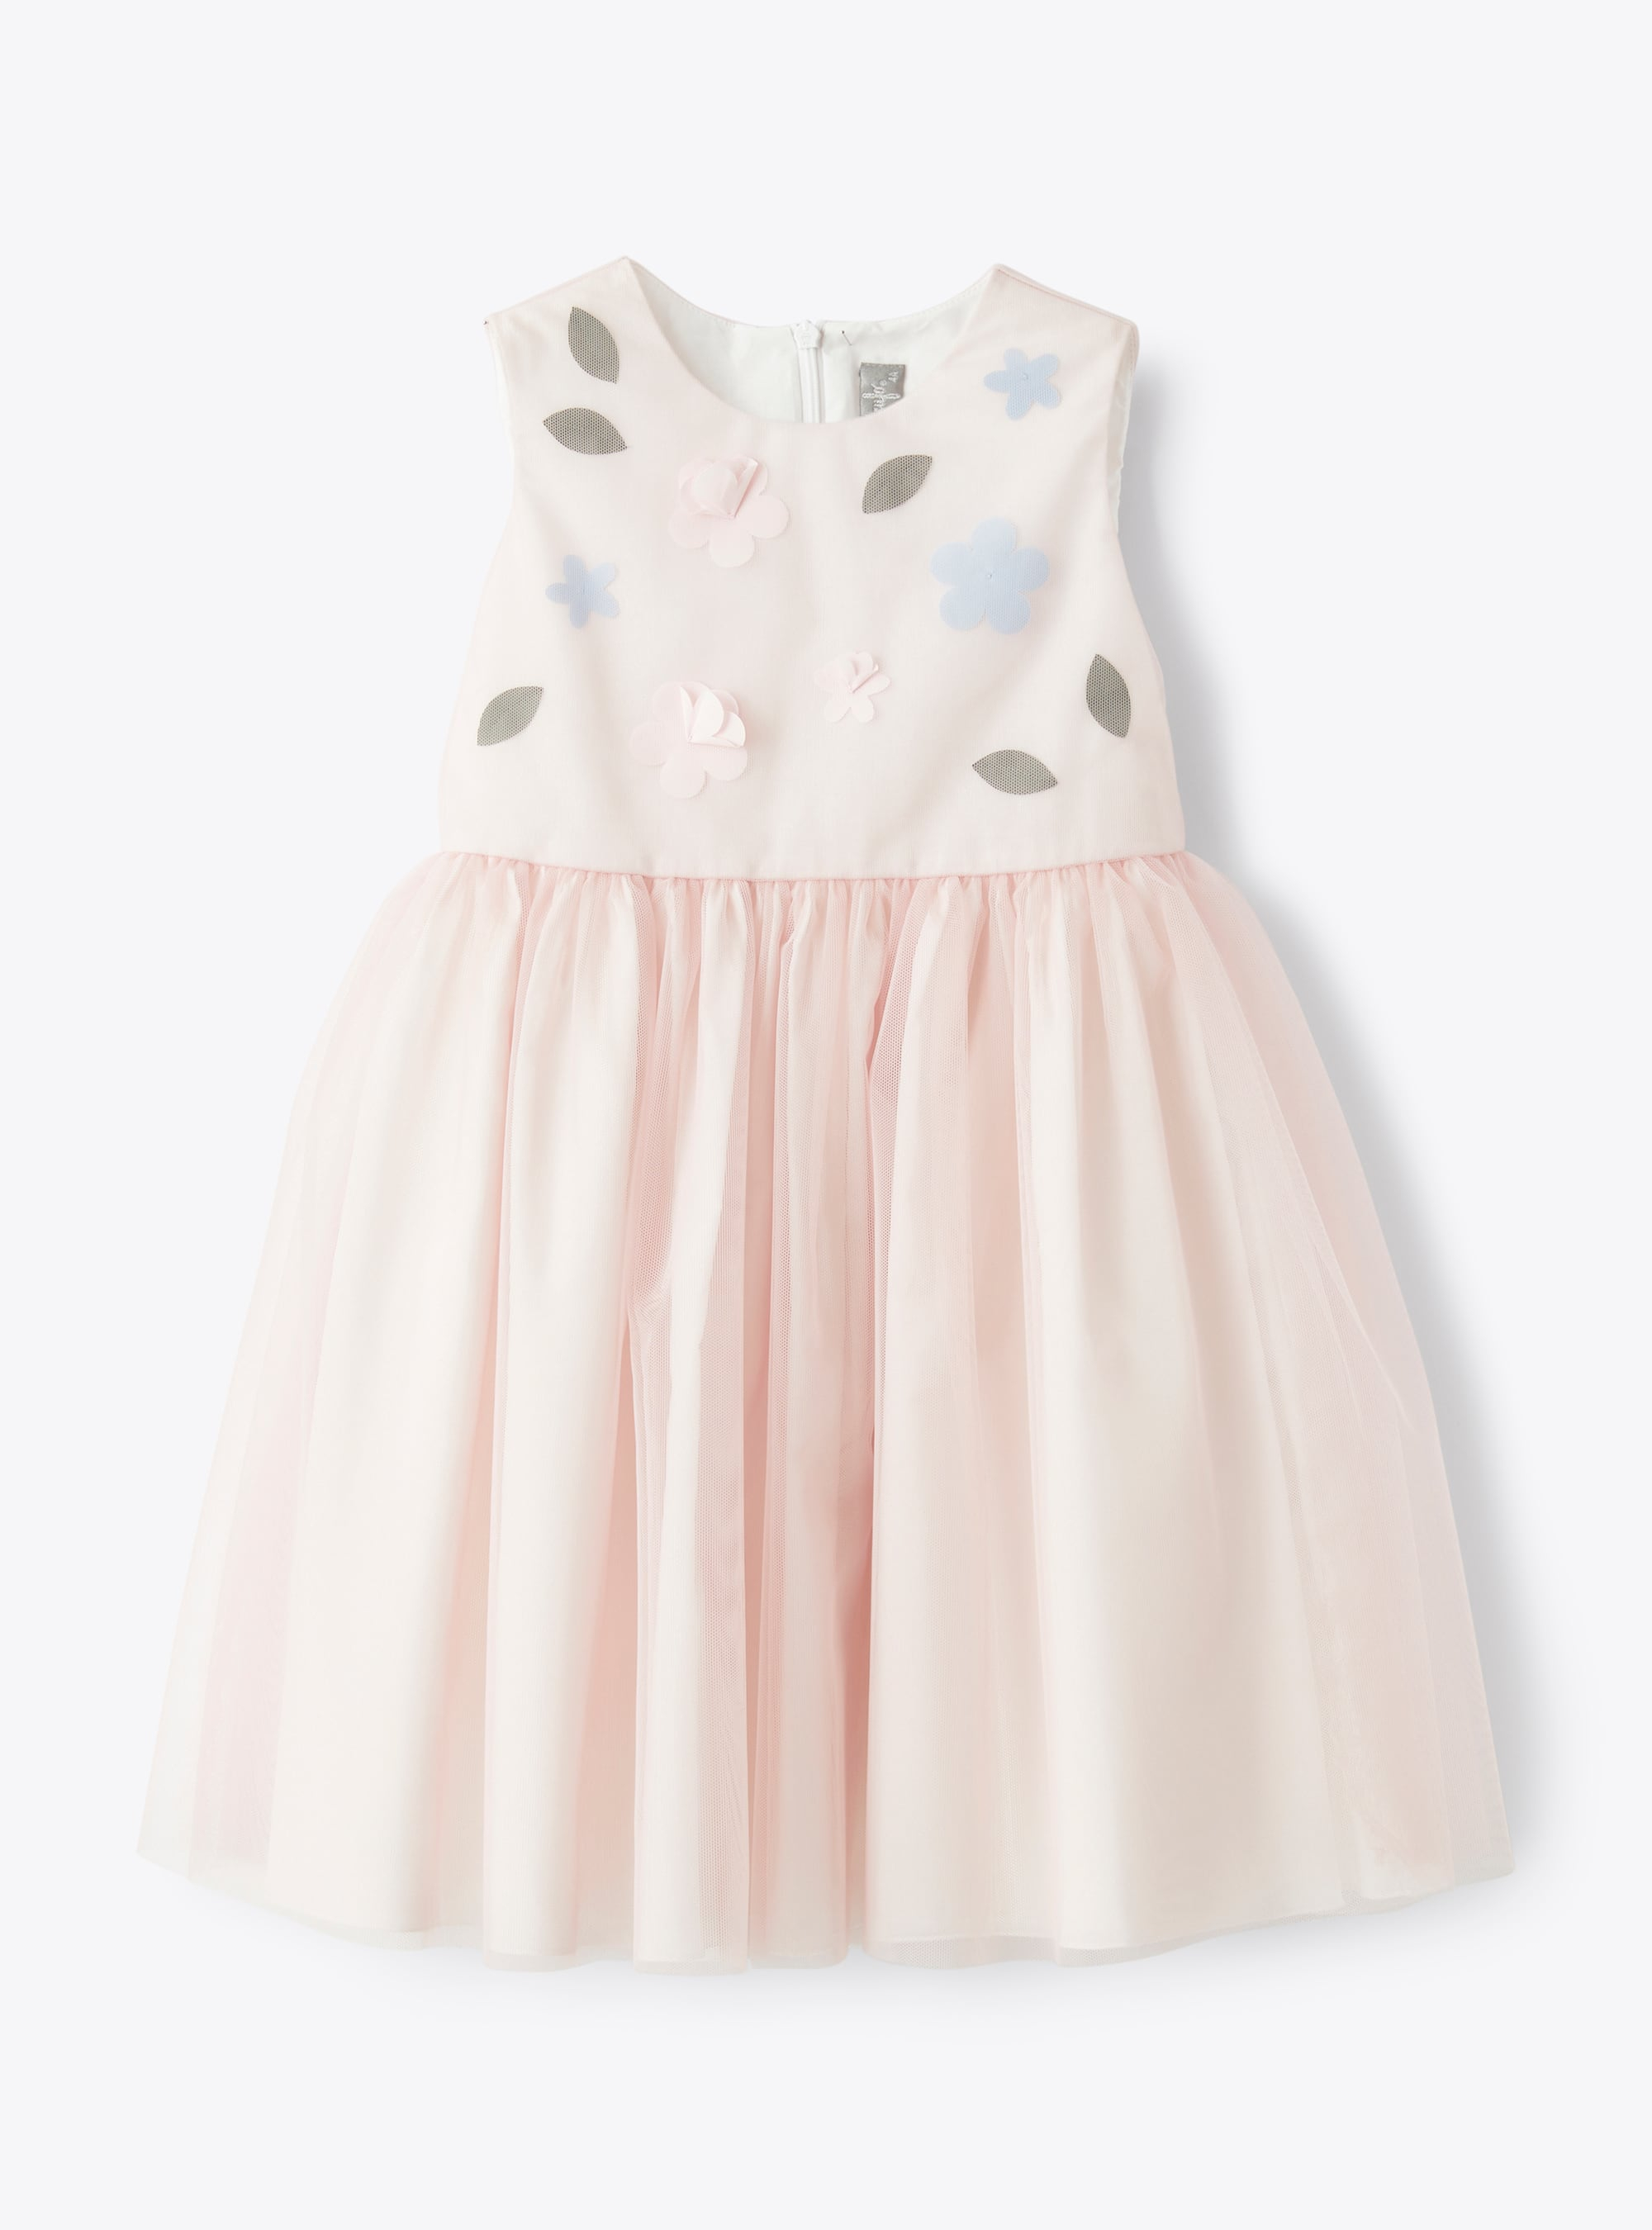 Dress in antique-rose tulle with appliqué flowers - Pink | Il Gufo